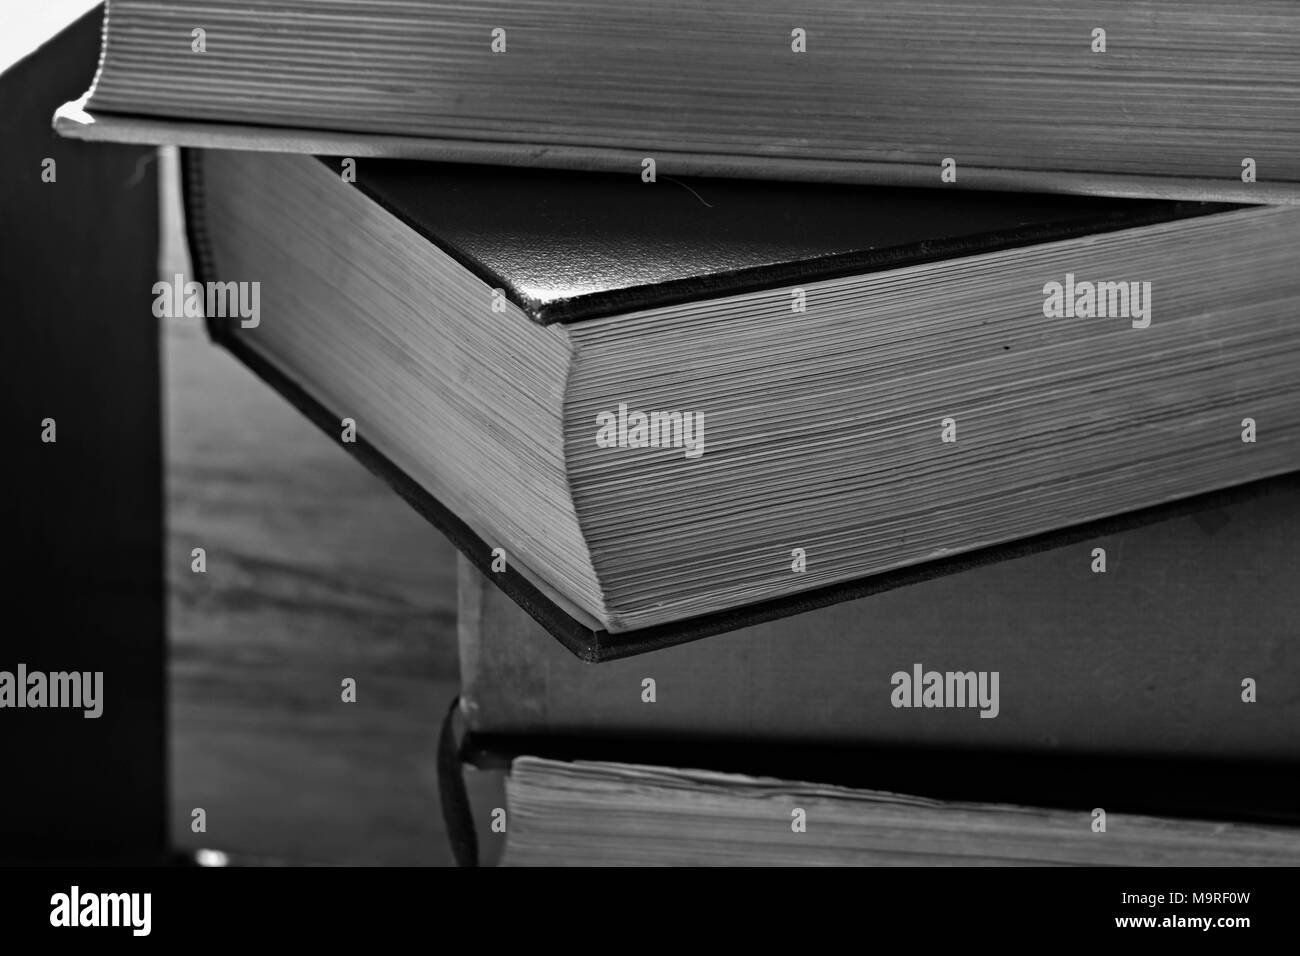 a stack of old dusty books stacked on top of each other Stock Photo